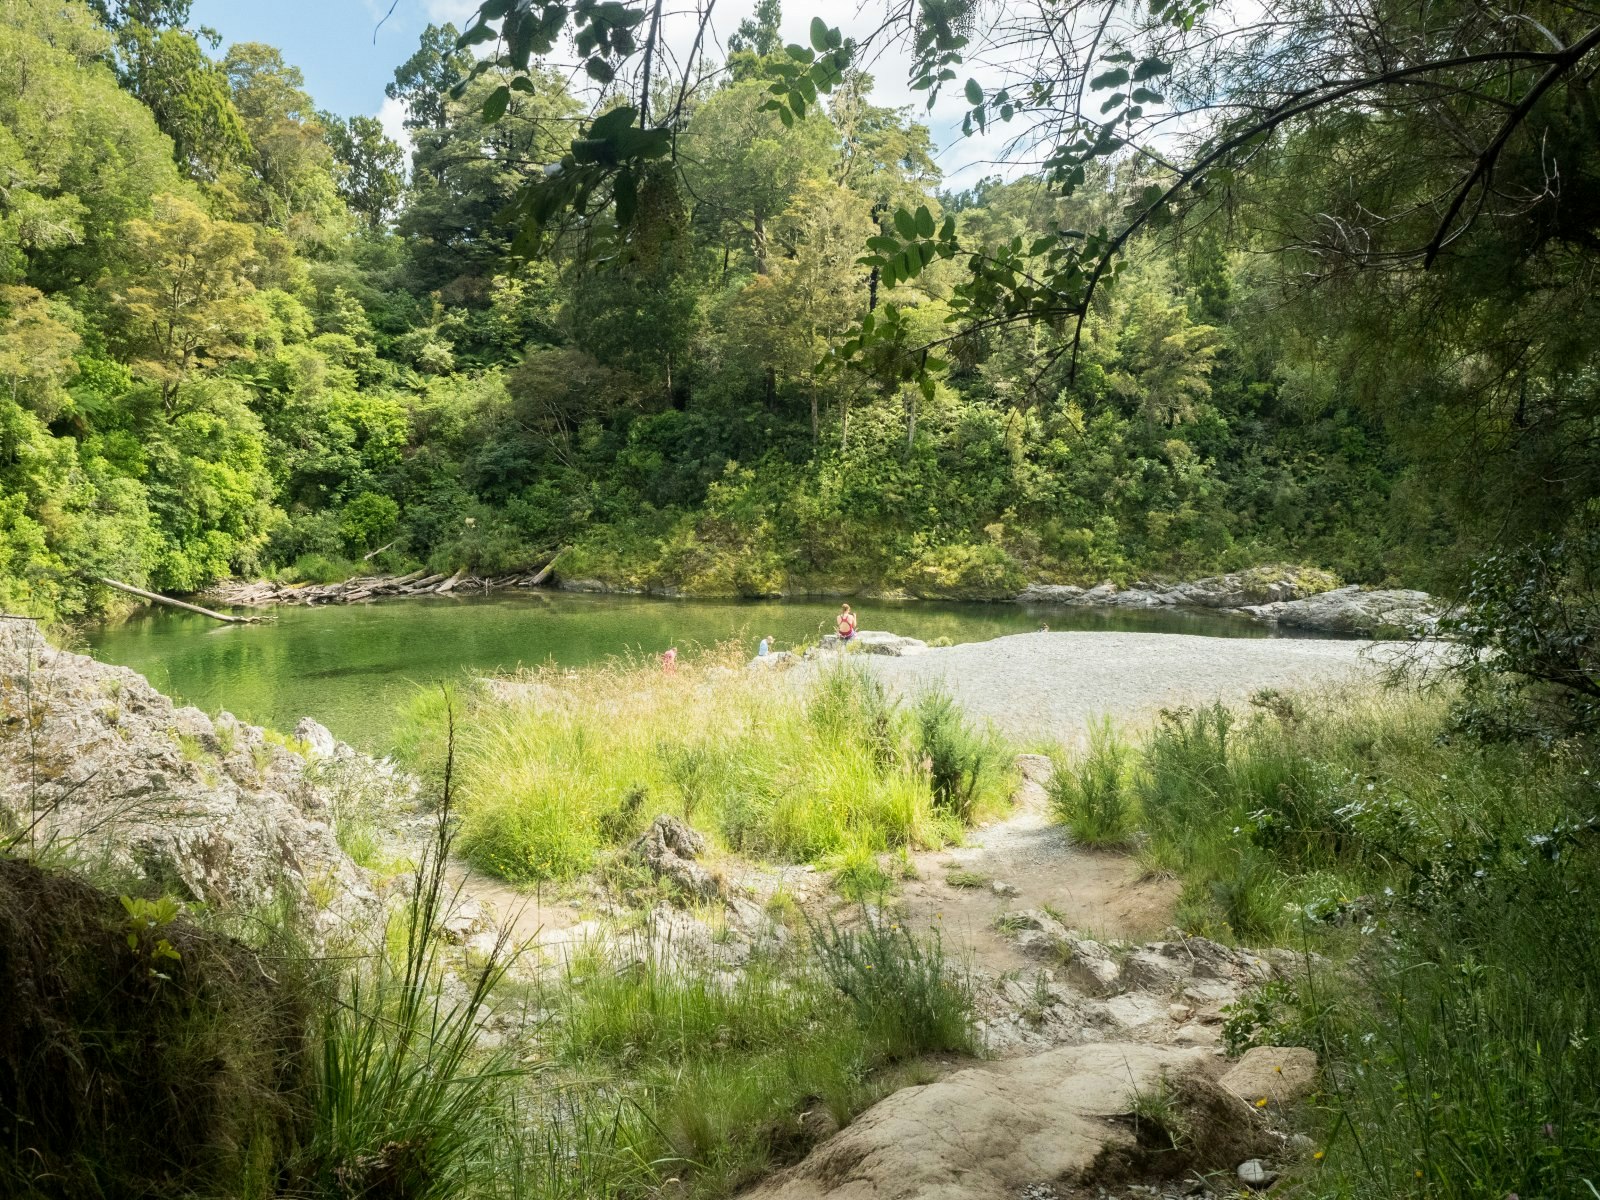 The watering hole at Pelorus Bridge, New Zealand. Someone is in the water in the far distance, they are surrounded by lush greenery. 